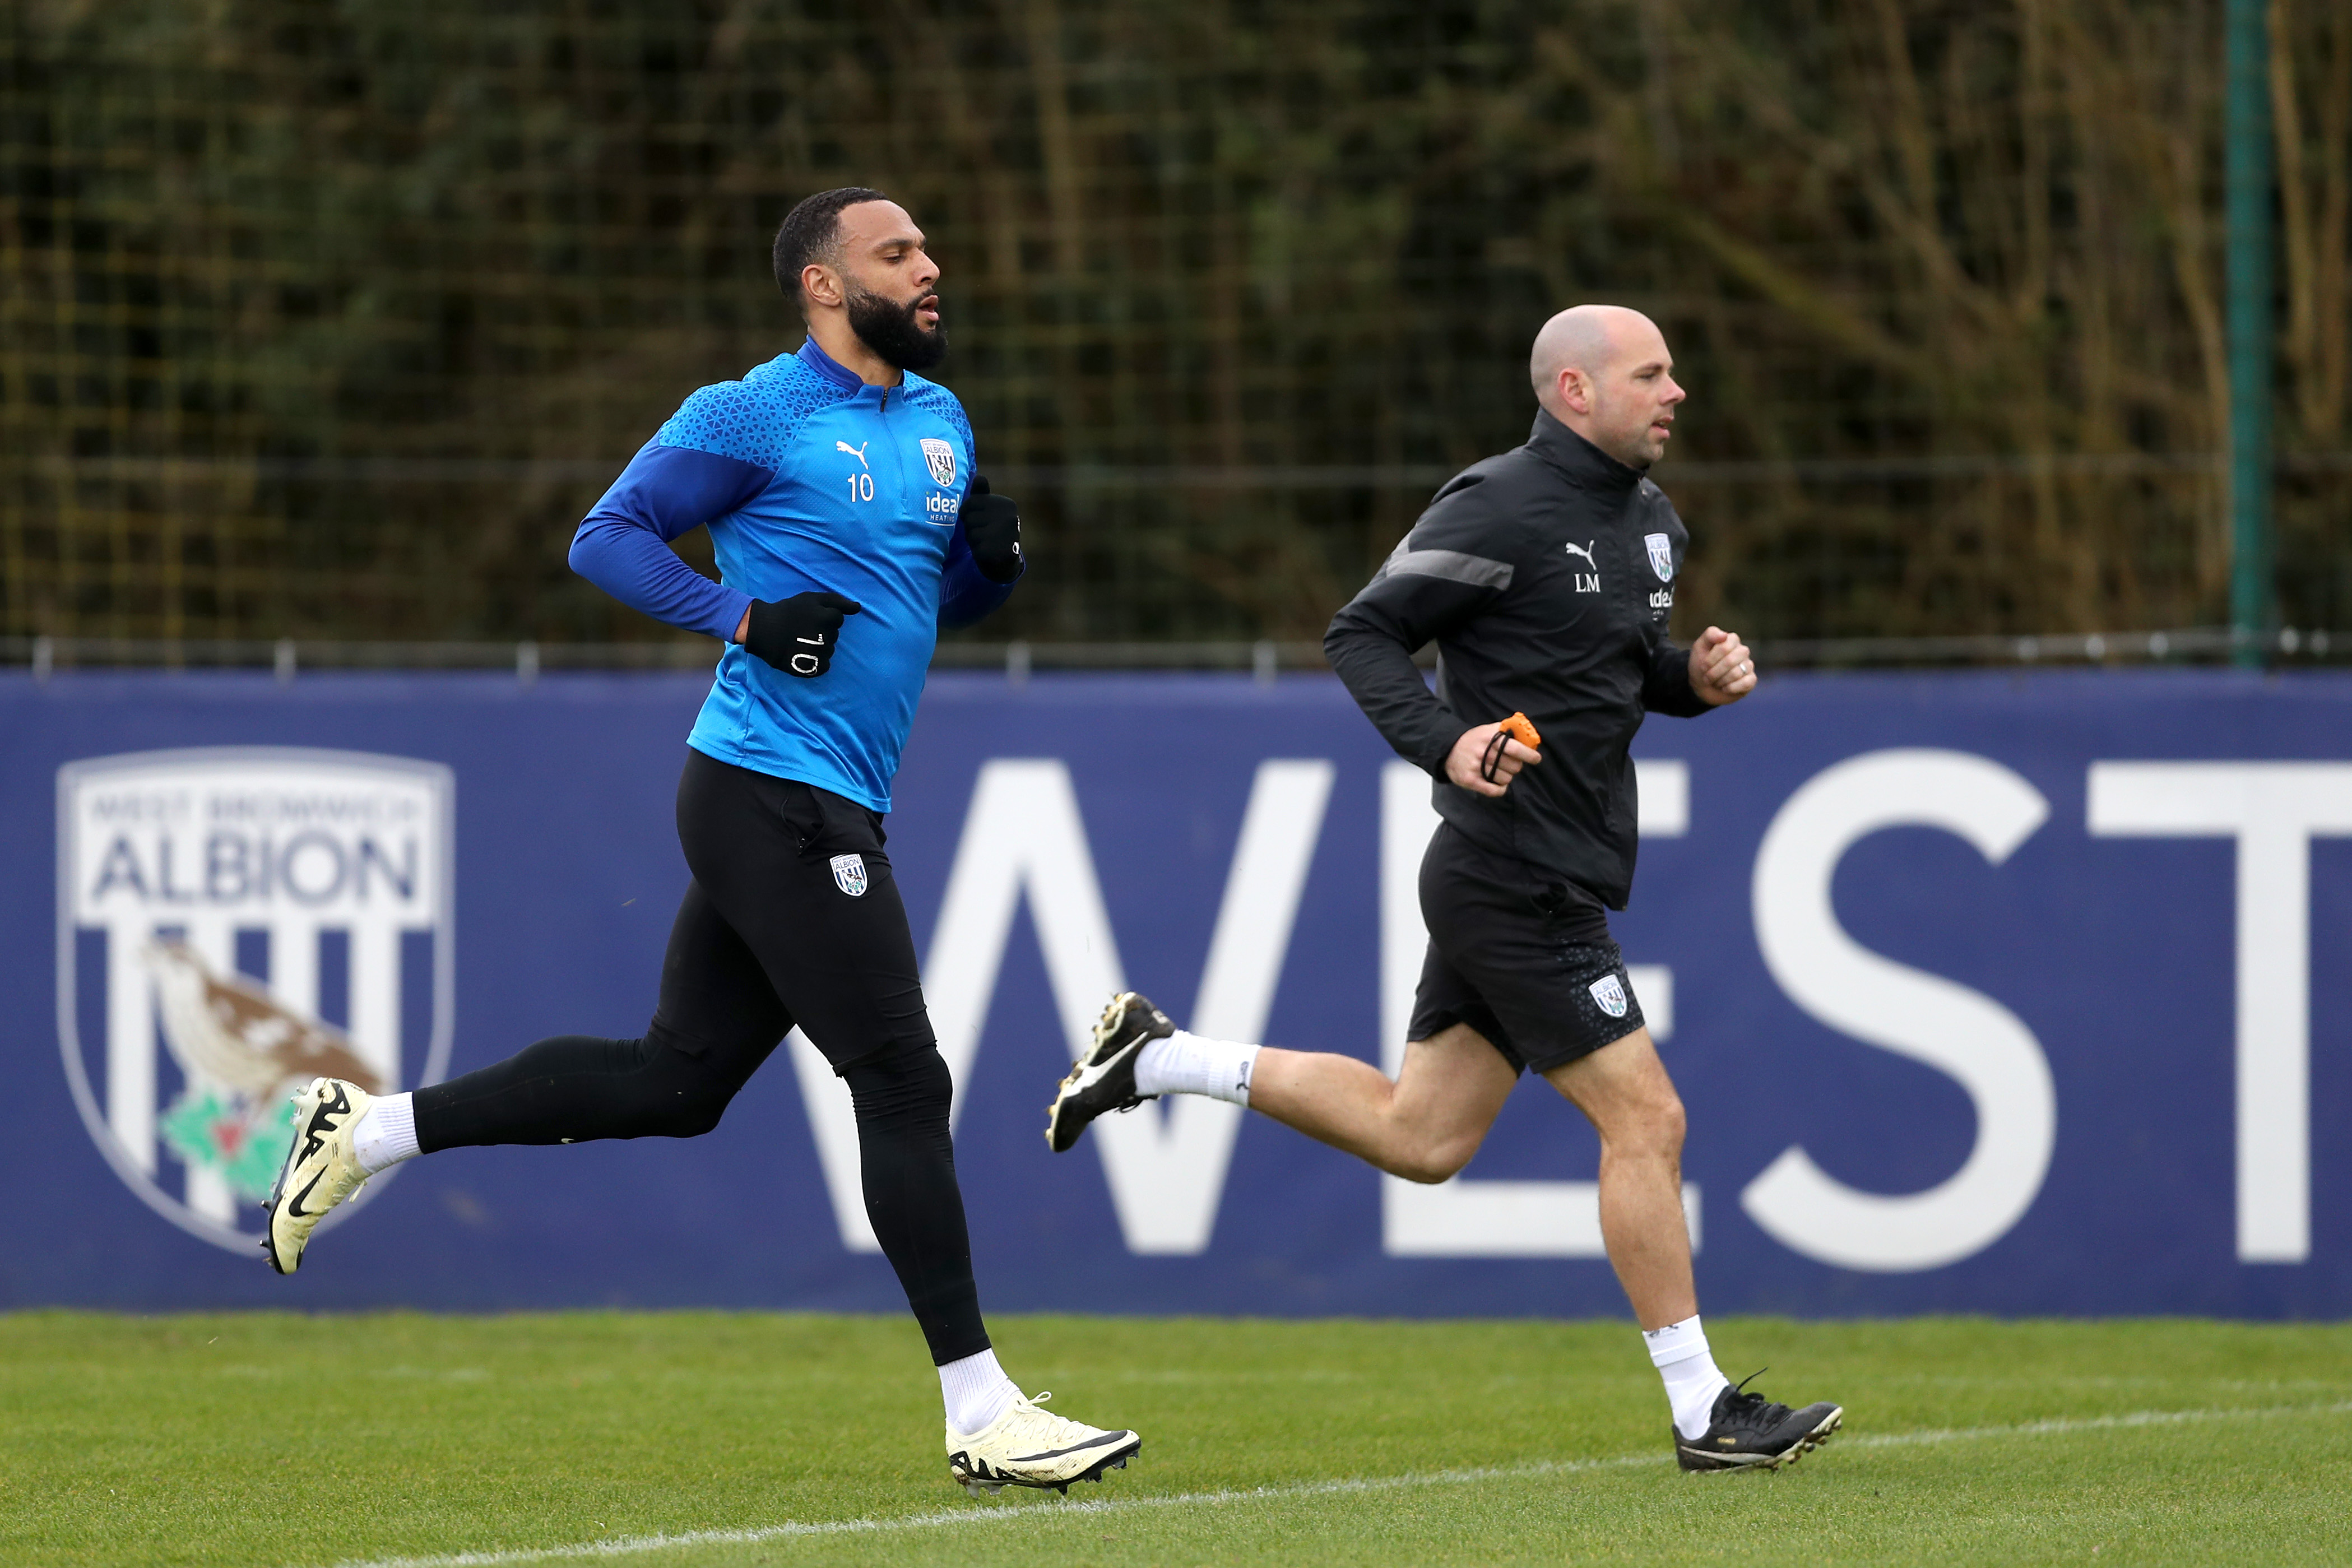 Matty Phillips running with a fitness coach during a training session